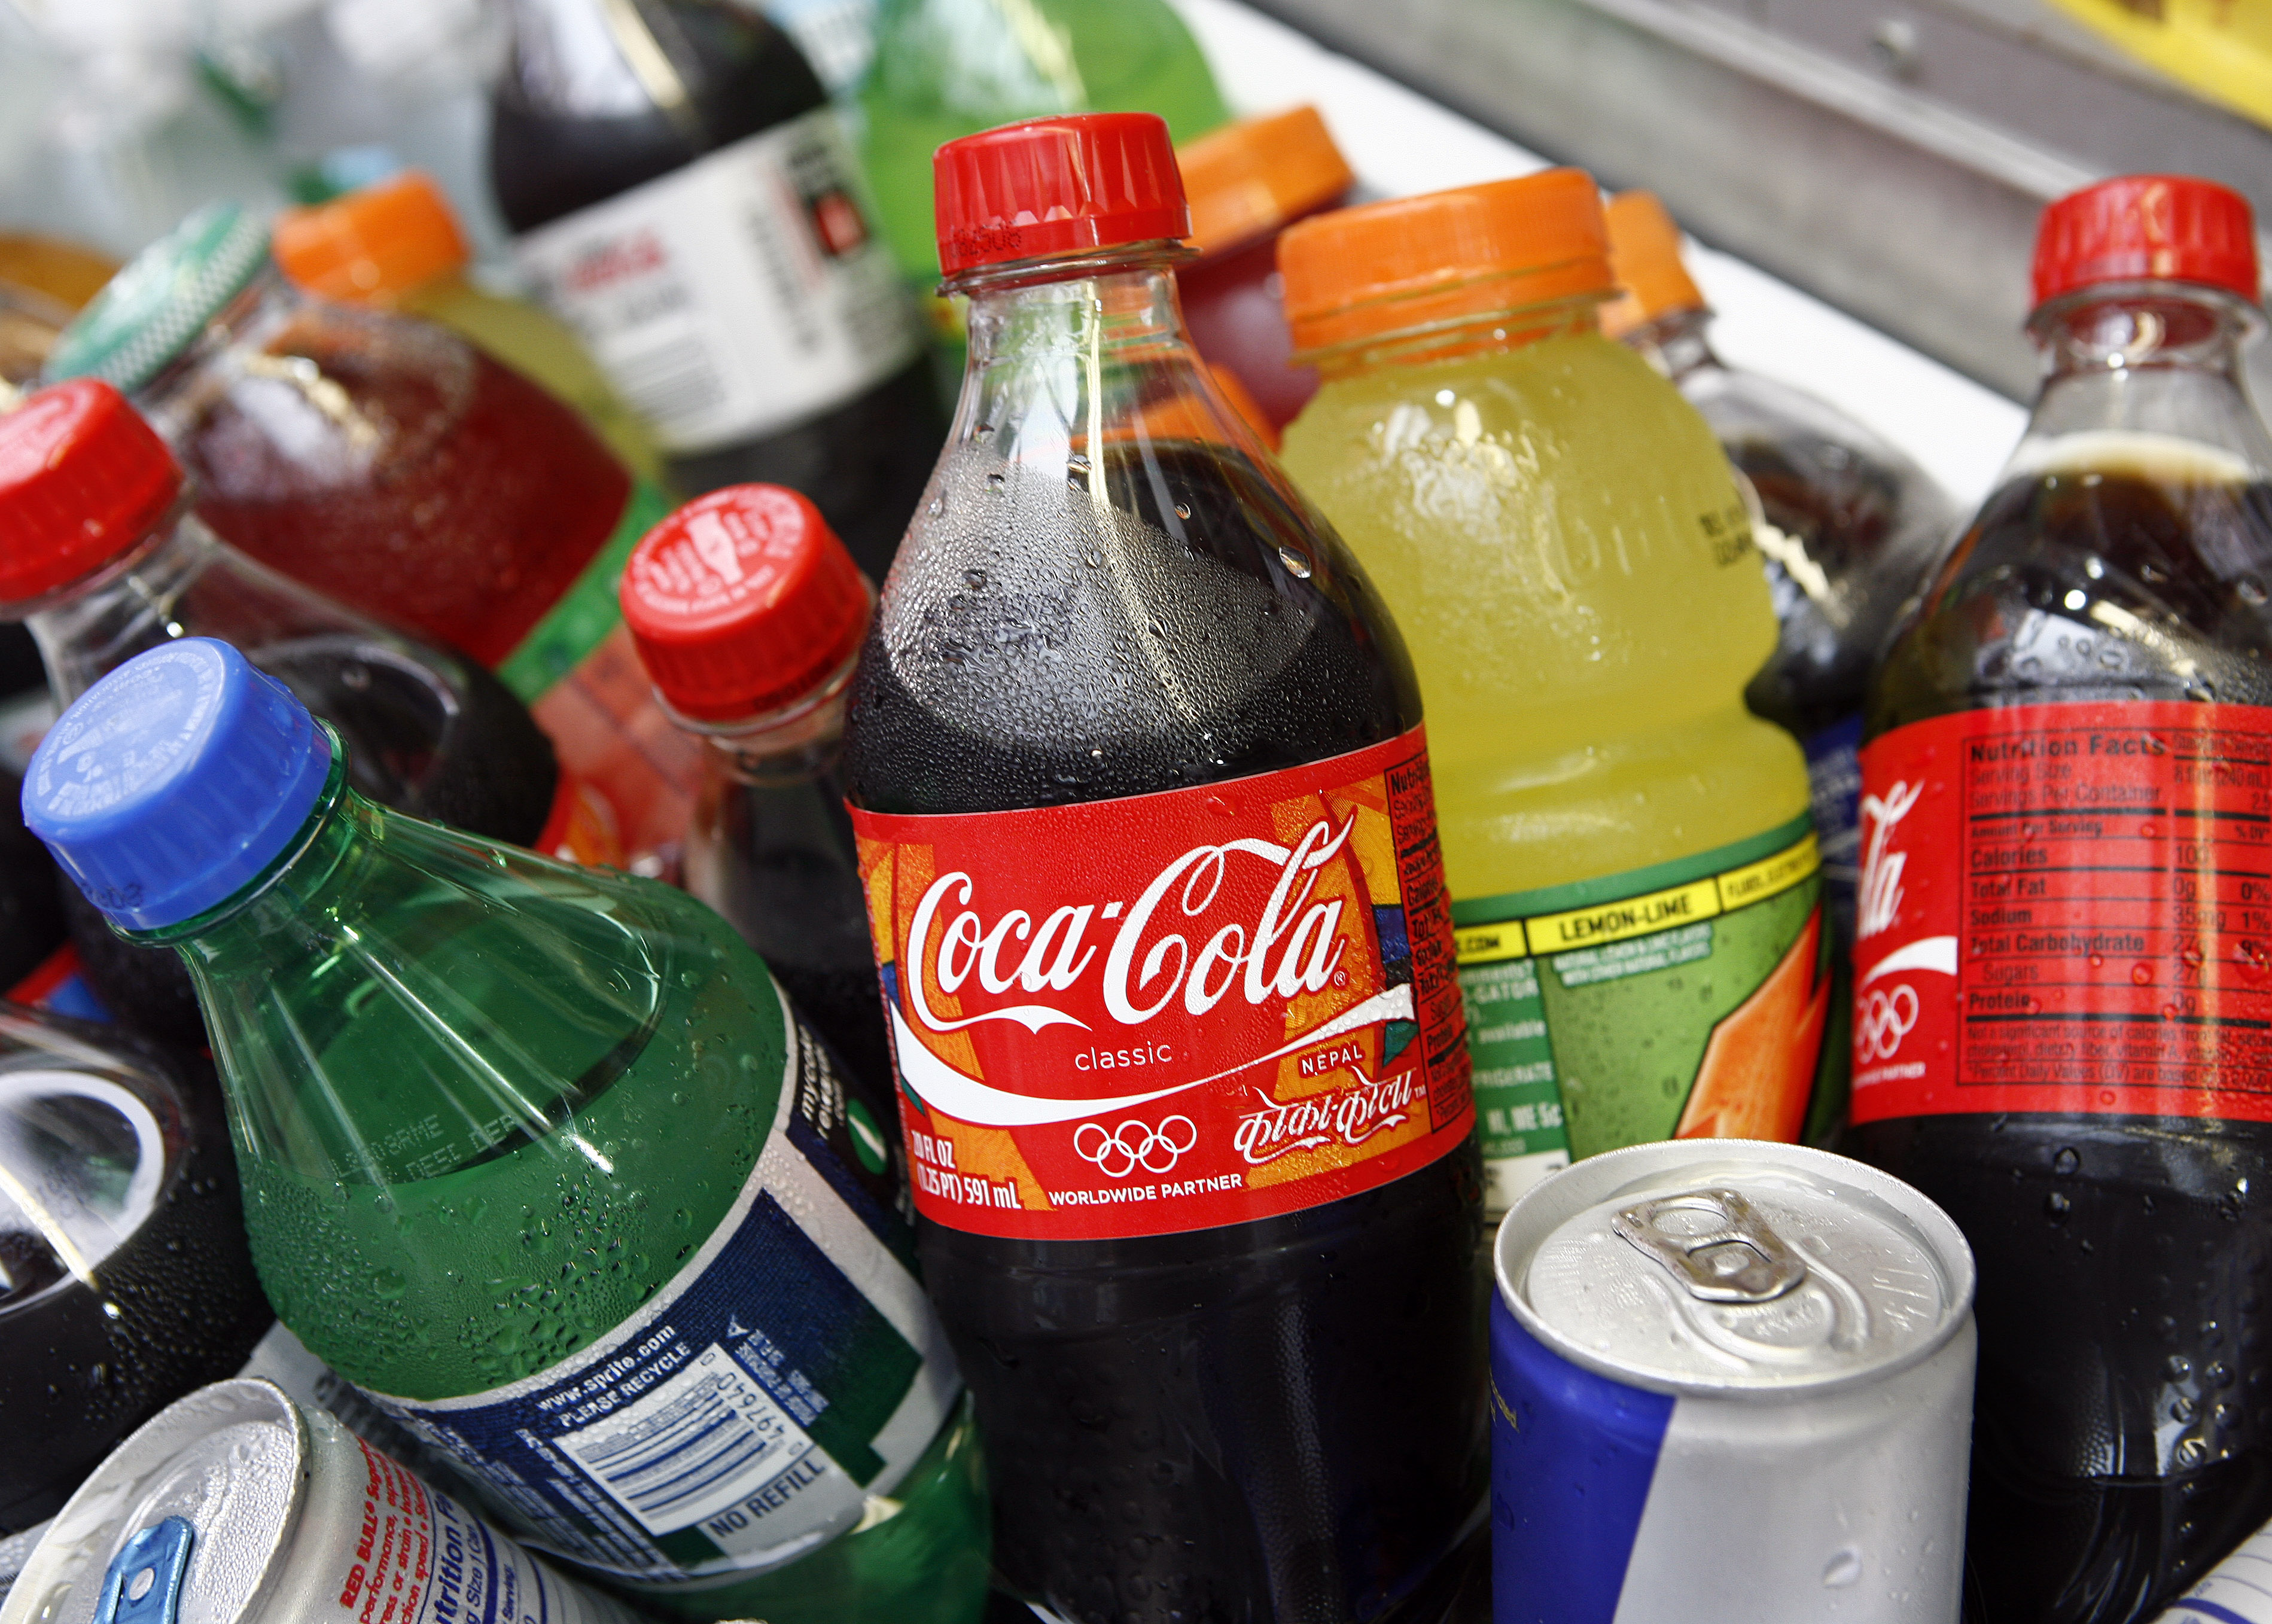 Study Finds Sugary Drinks Linked to 180K Deaths Annually Worldwide